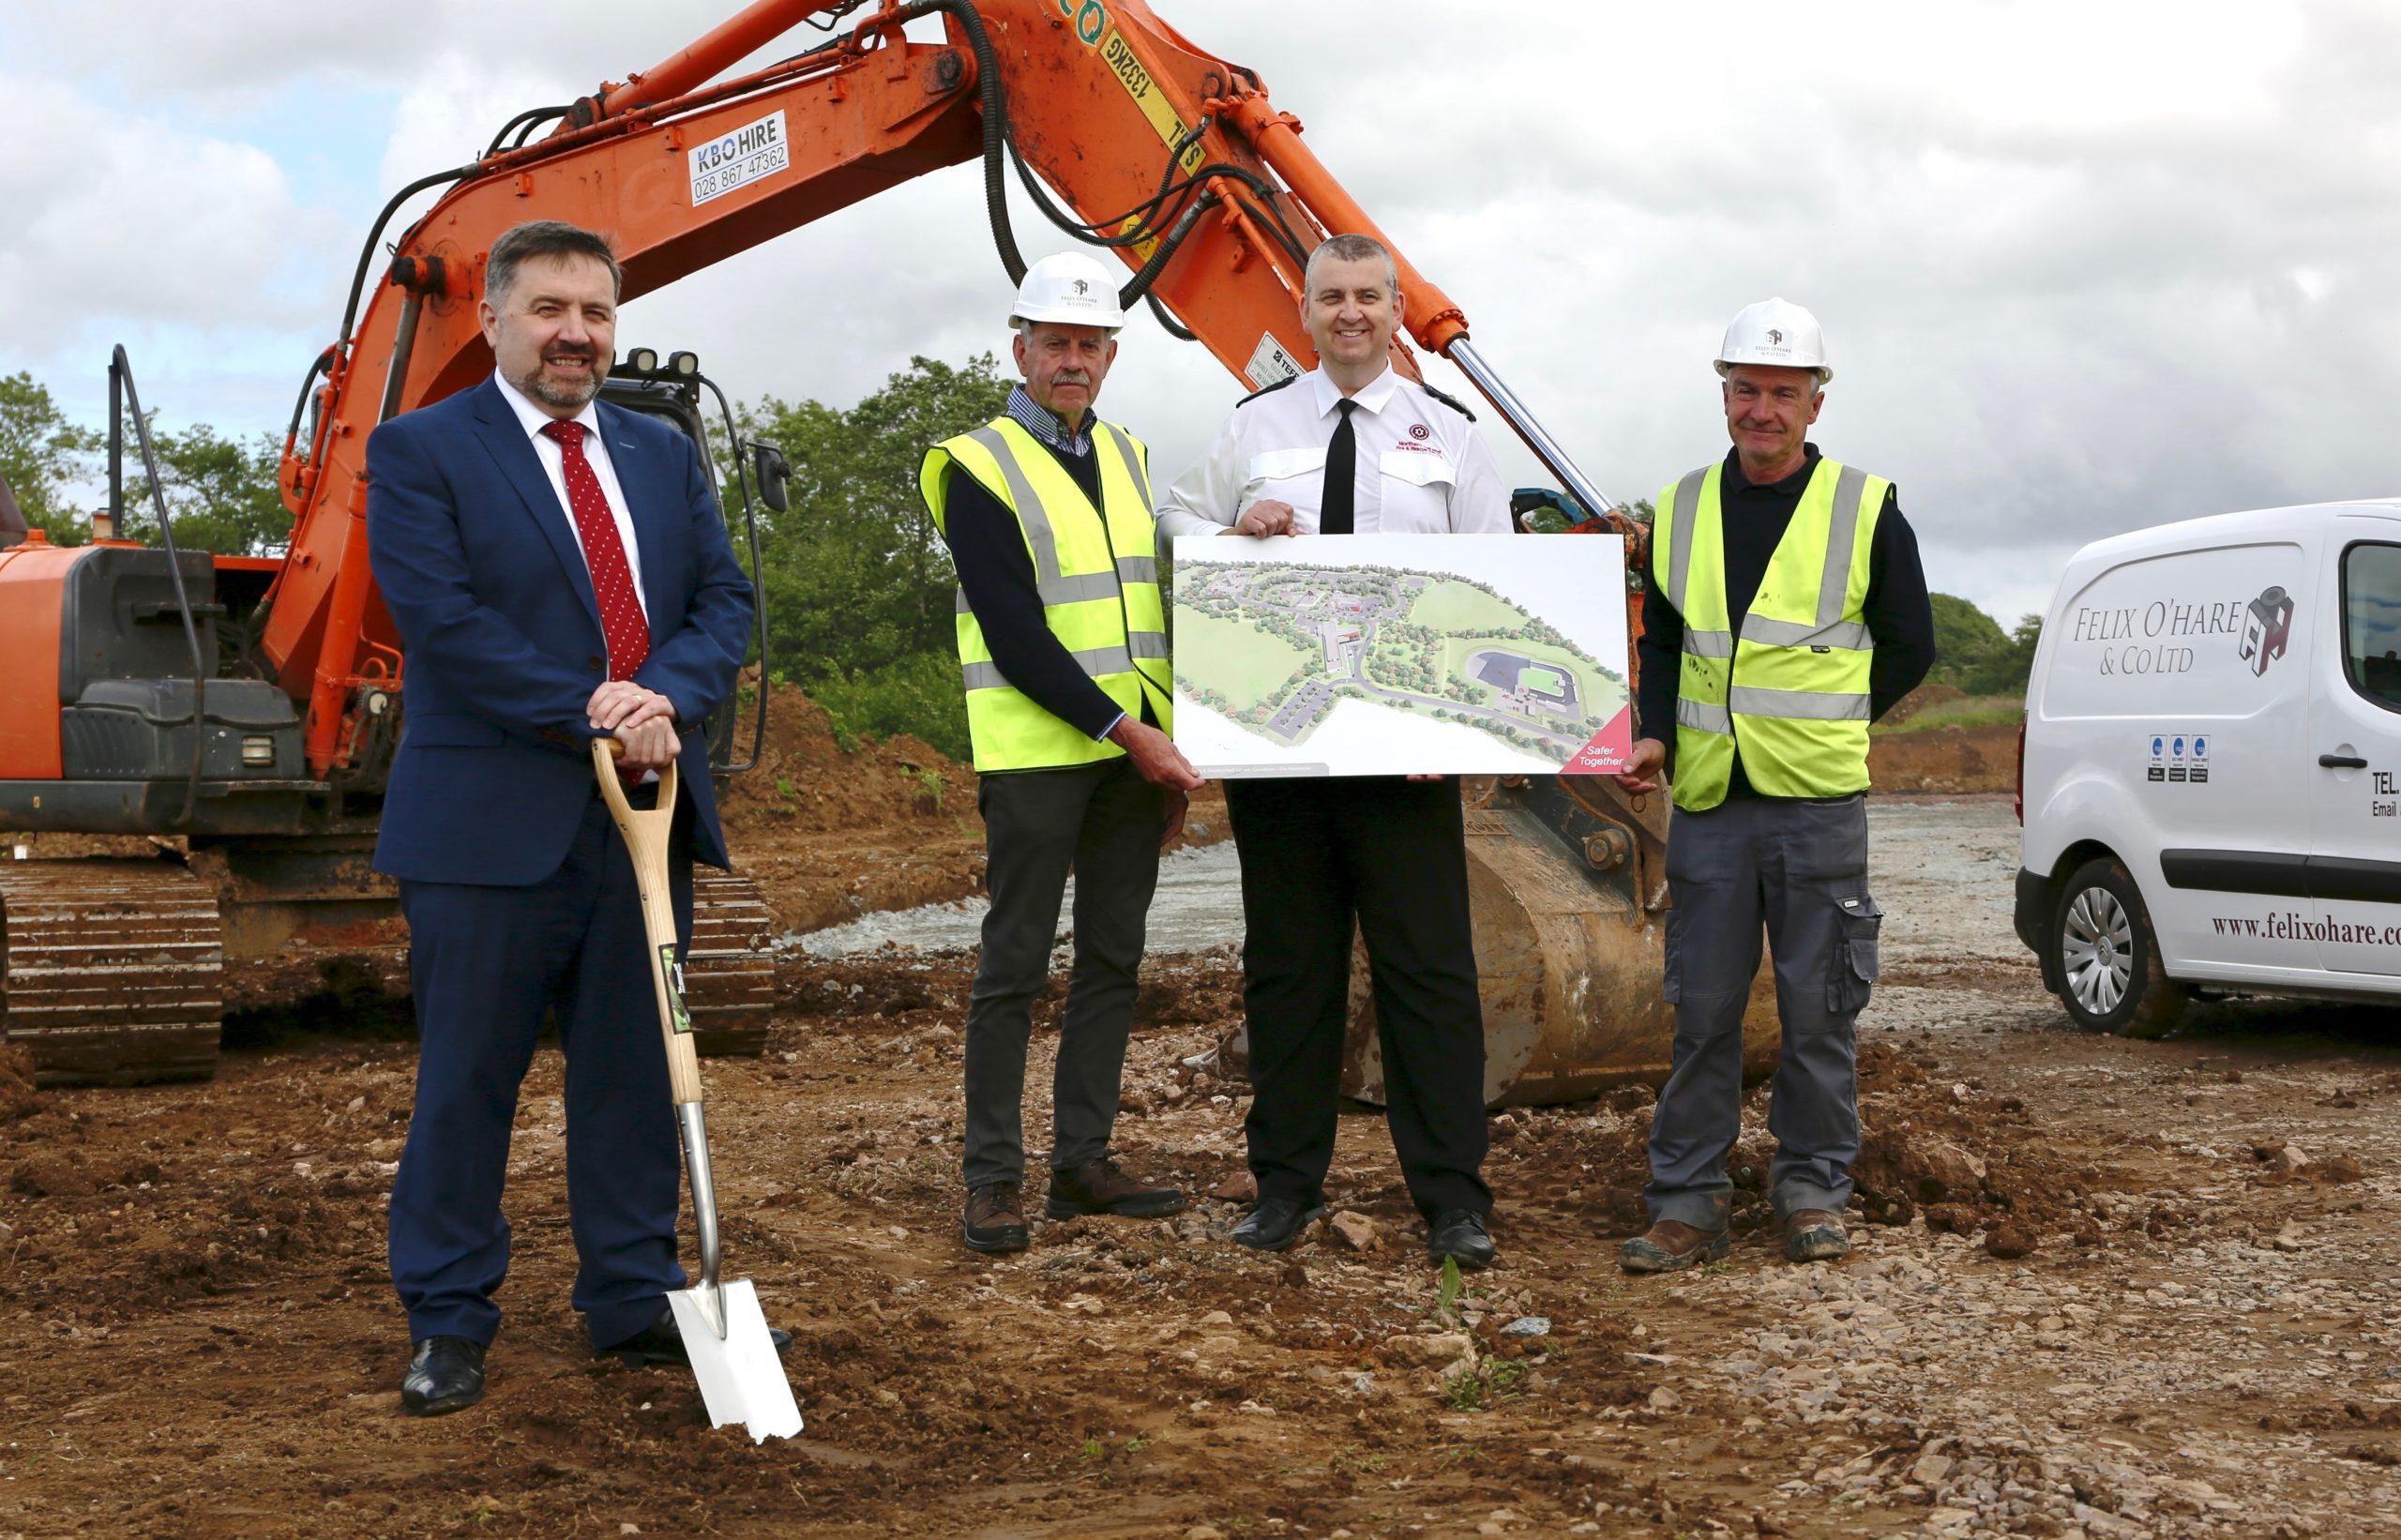 NEW TRAINING CENTRE FOR NORTHERN IRELAND FIRE & RESCUE SERVICE